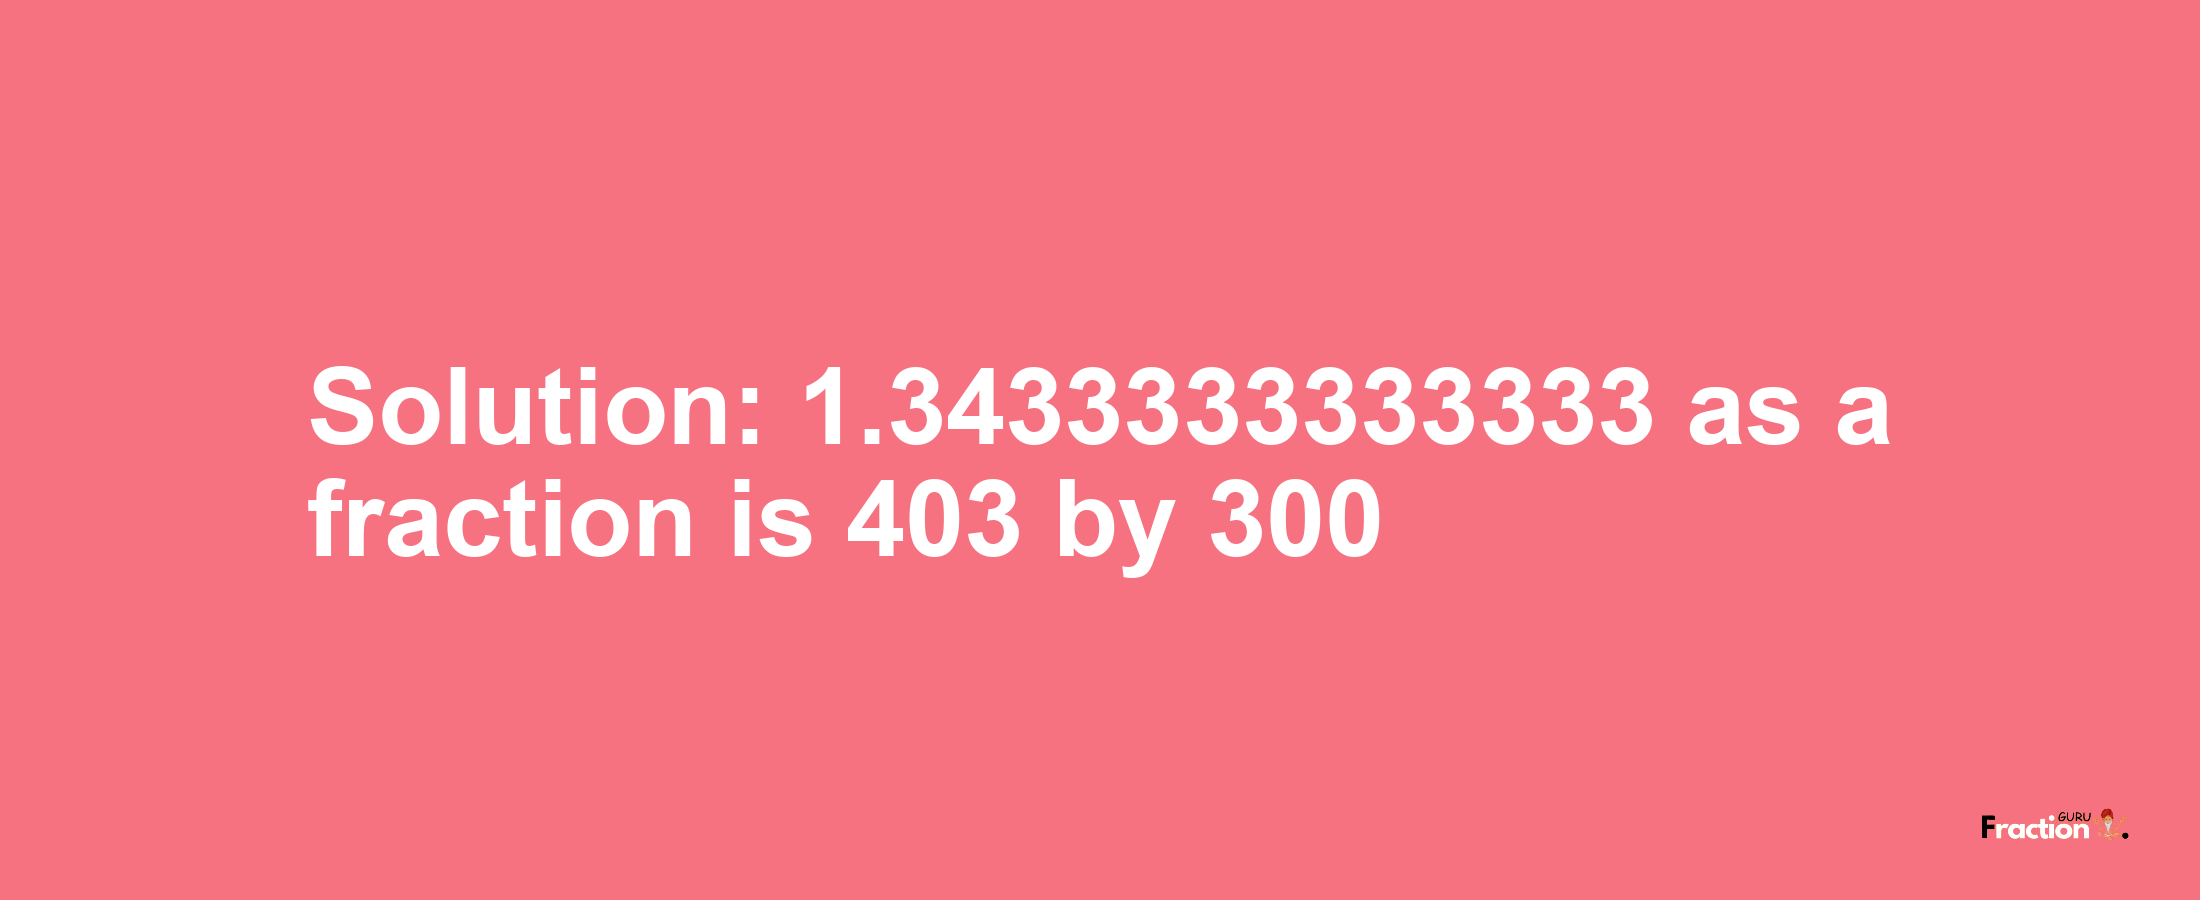 Solution:1.3433333333333 as a fraction is 403/300